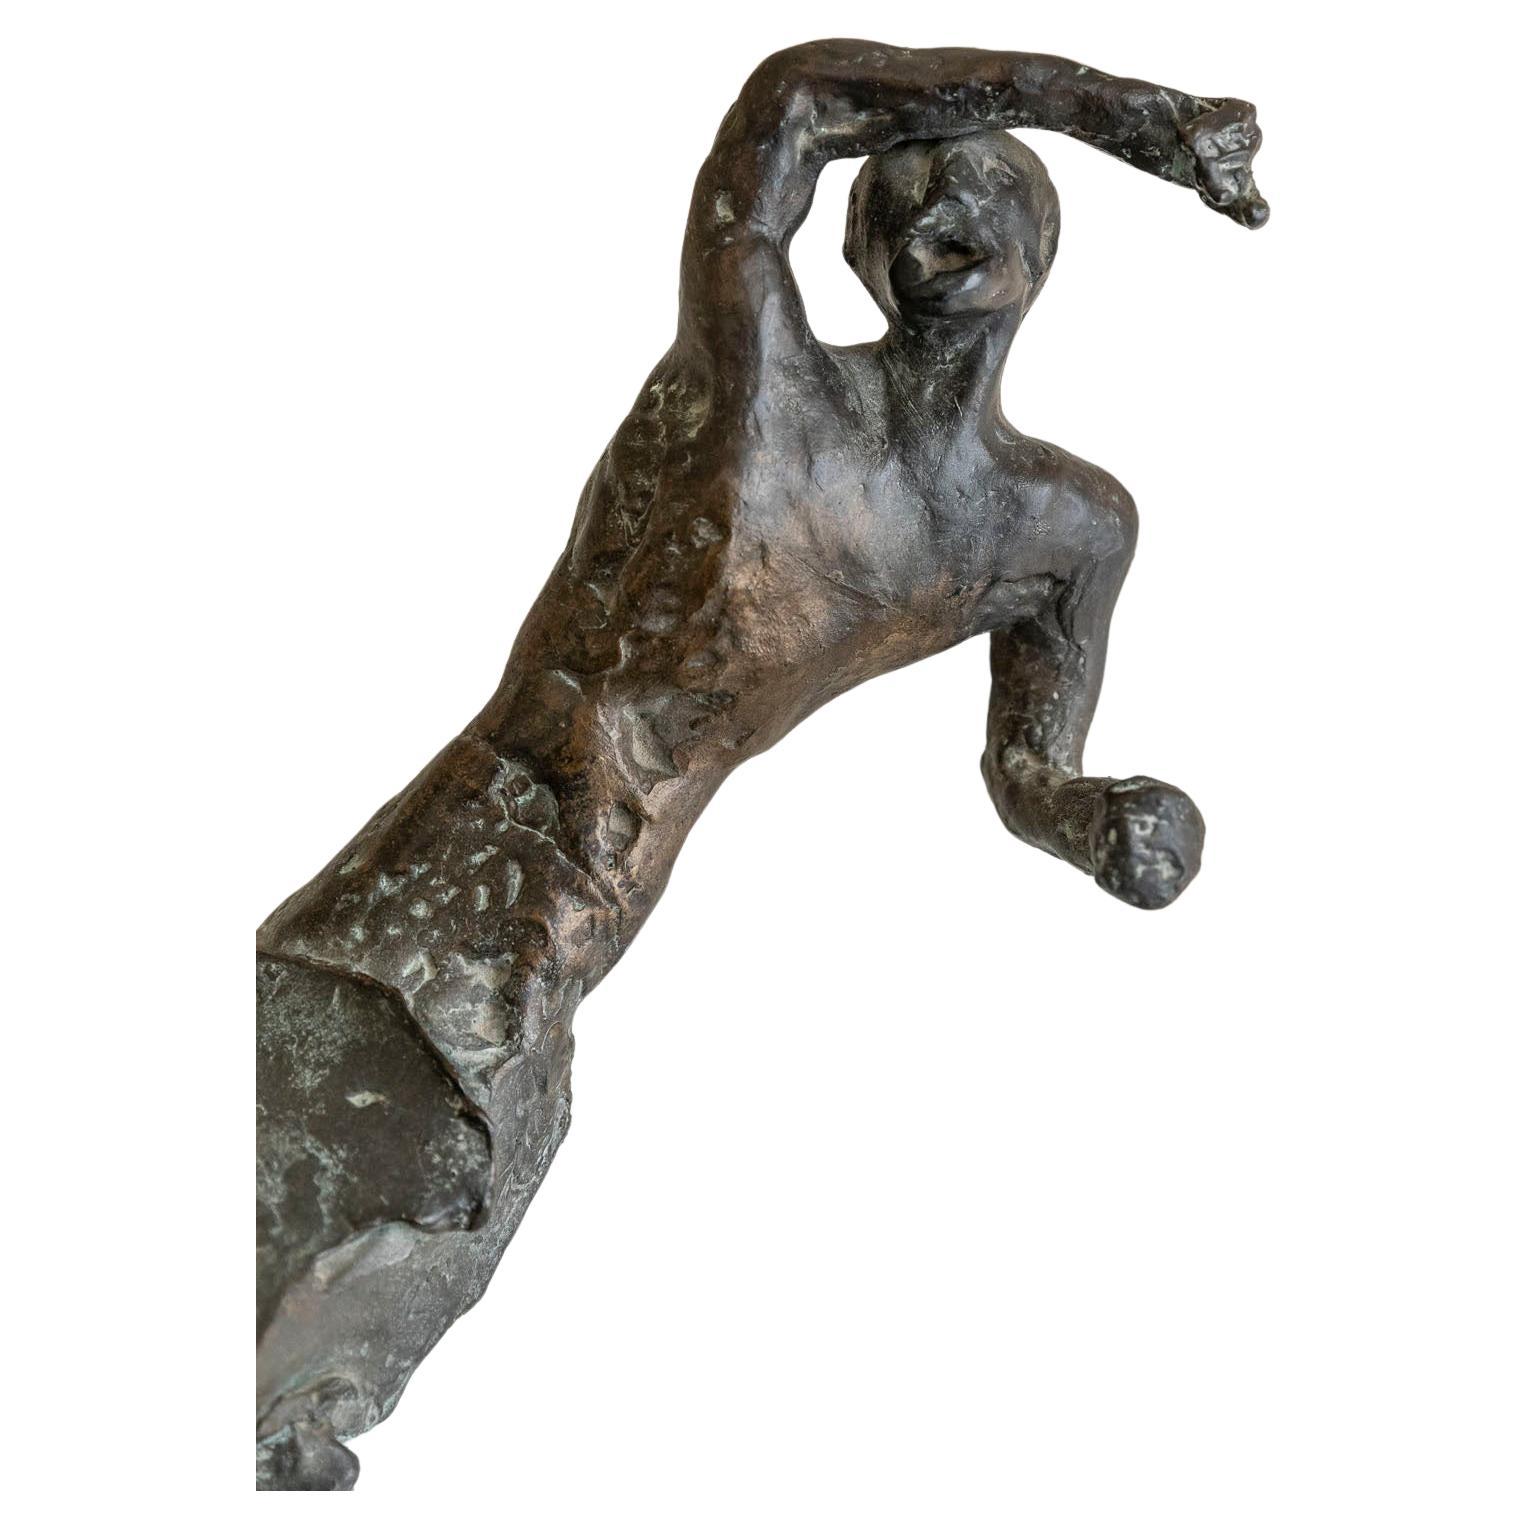 Italian bronze sculpture by Marcello Pietrantoni, 1980 ca. 
The sculpture is signed on the base. 

Marcello Pietrantoni was born in Brescia in 1934. Throughout his life he has accompanied the profession of architect a research that has used the